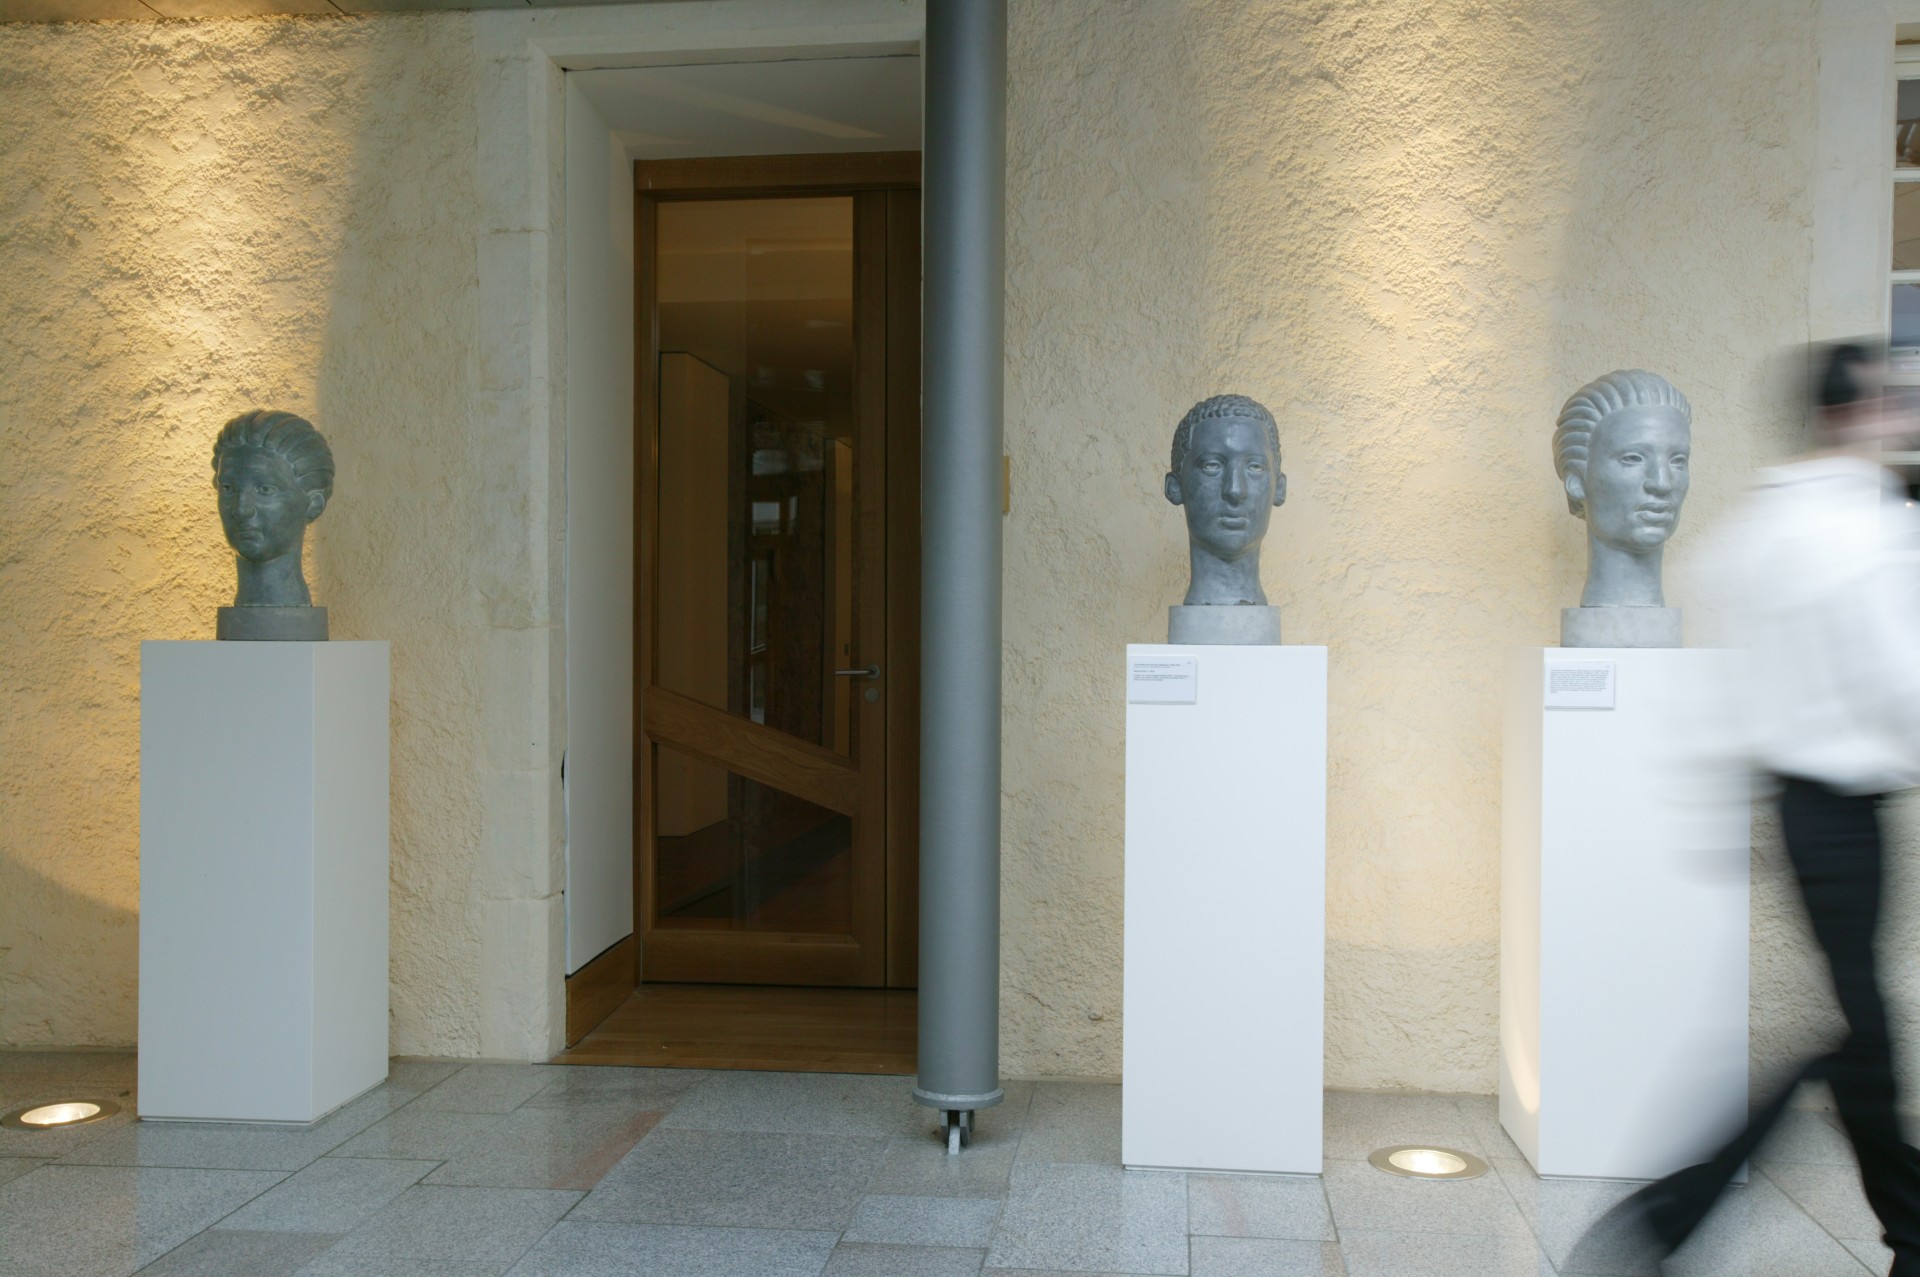 Three busts of human heads made of concrete. 